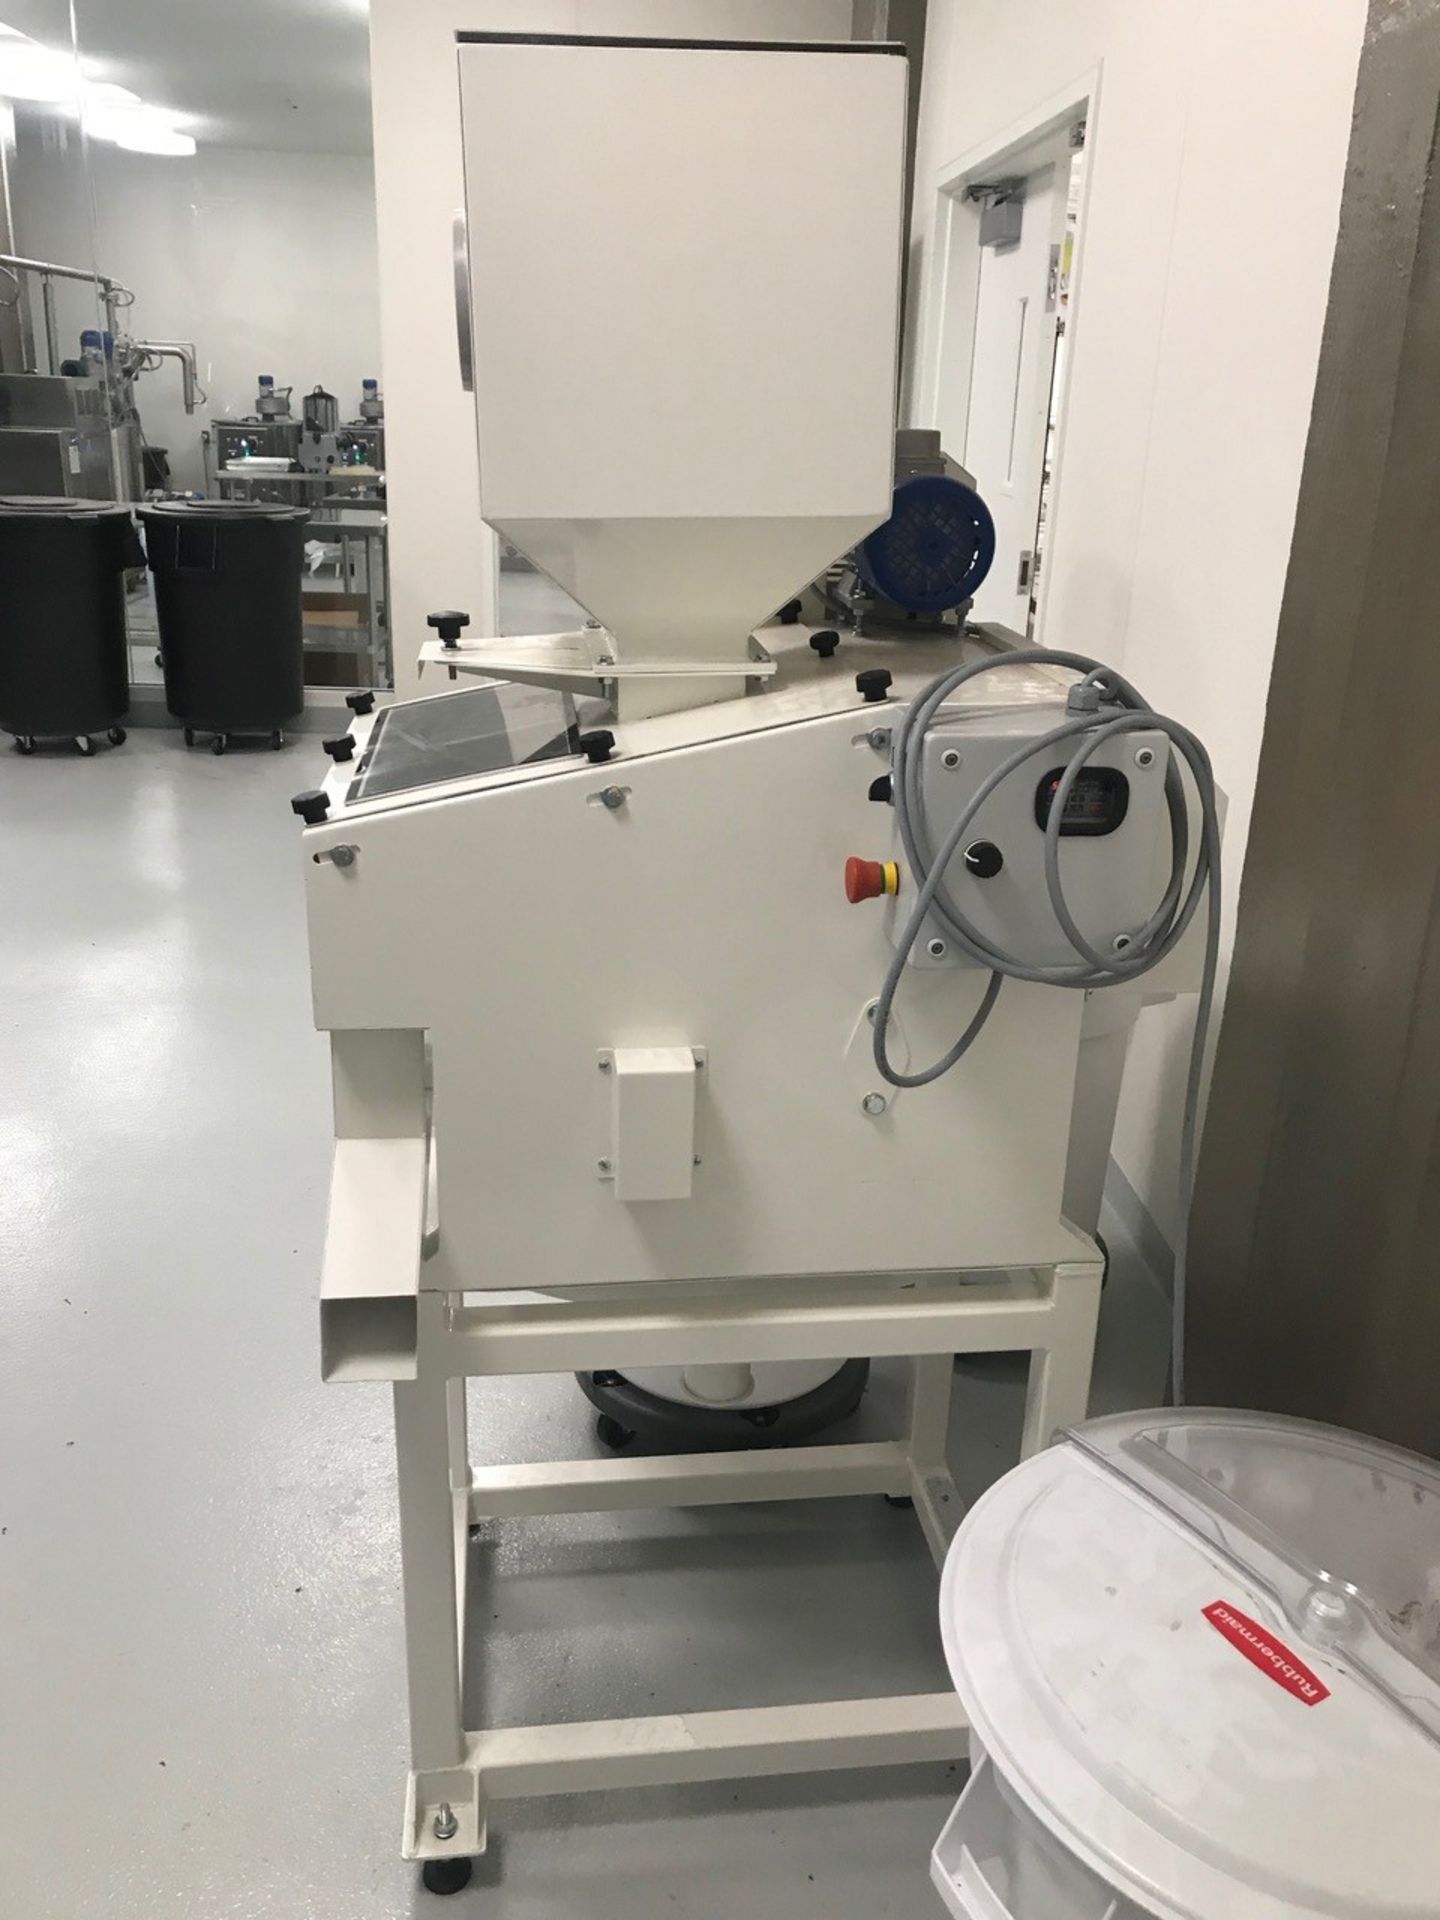 New 2017 Pack Int Model DT-150 De-Stoner 150kg/hour for bean cleaning serial number 290-01 with - Image 2 of 4